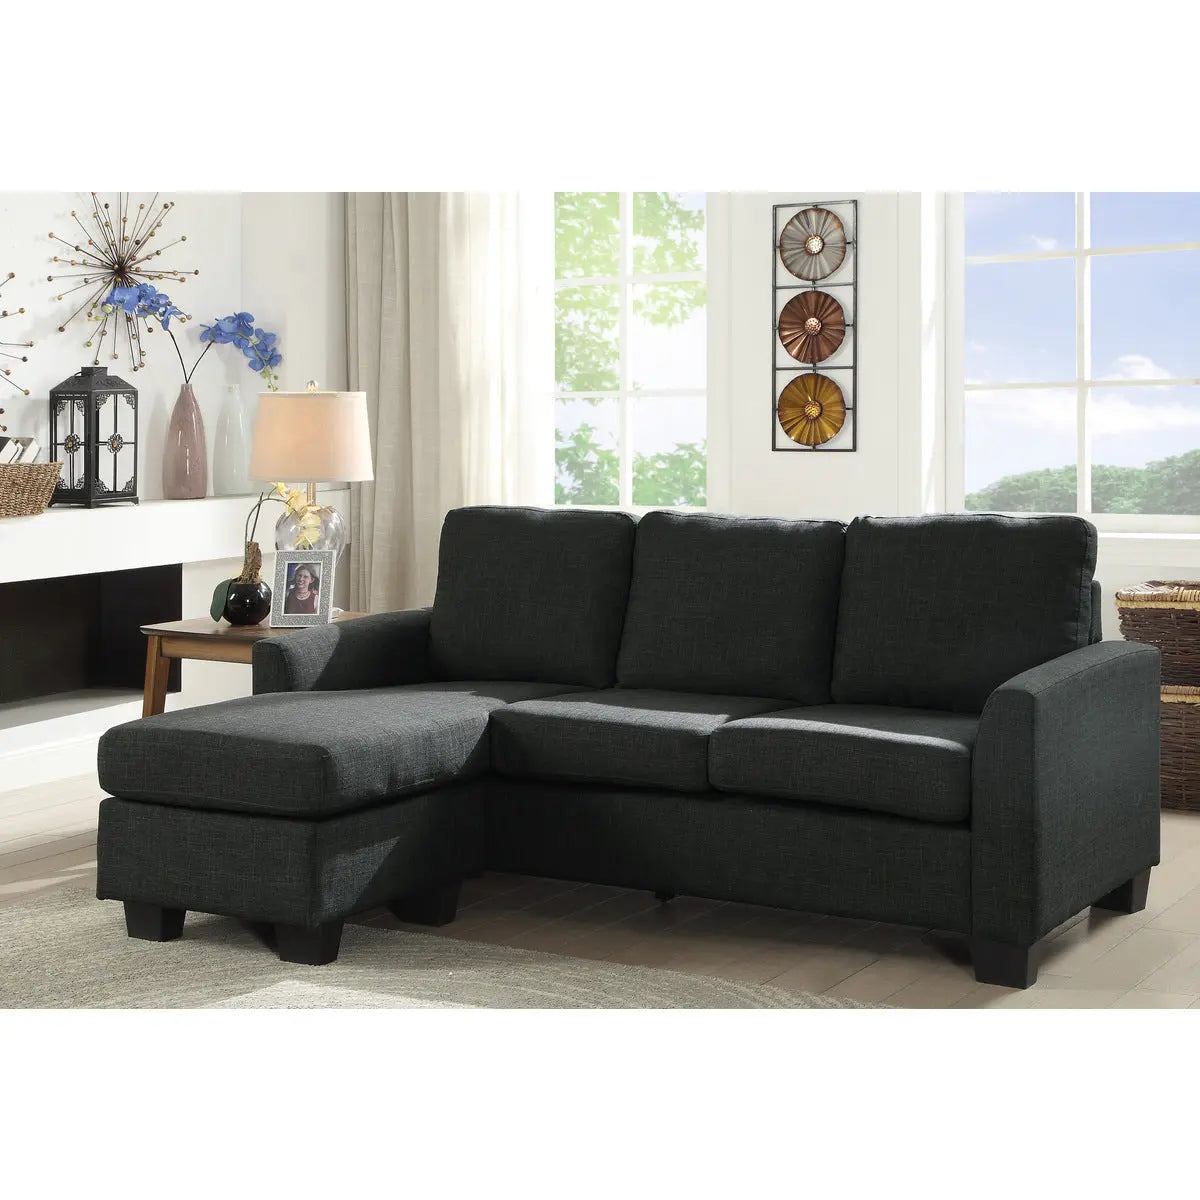 Promytheus Reversible Sofa Chaise 9173 - Complete Home Furnish